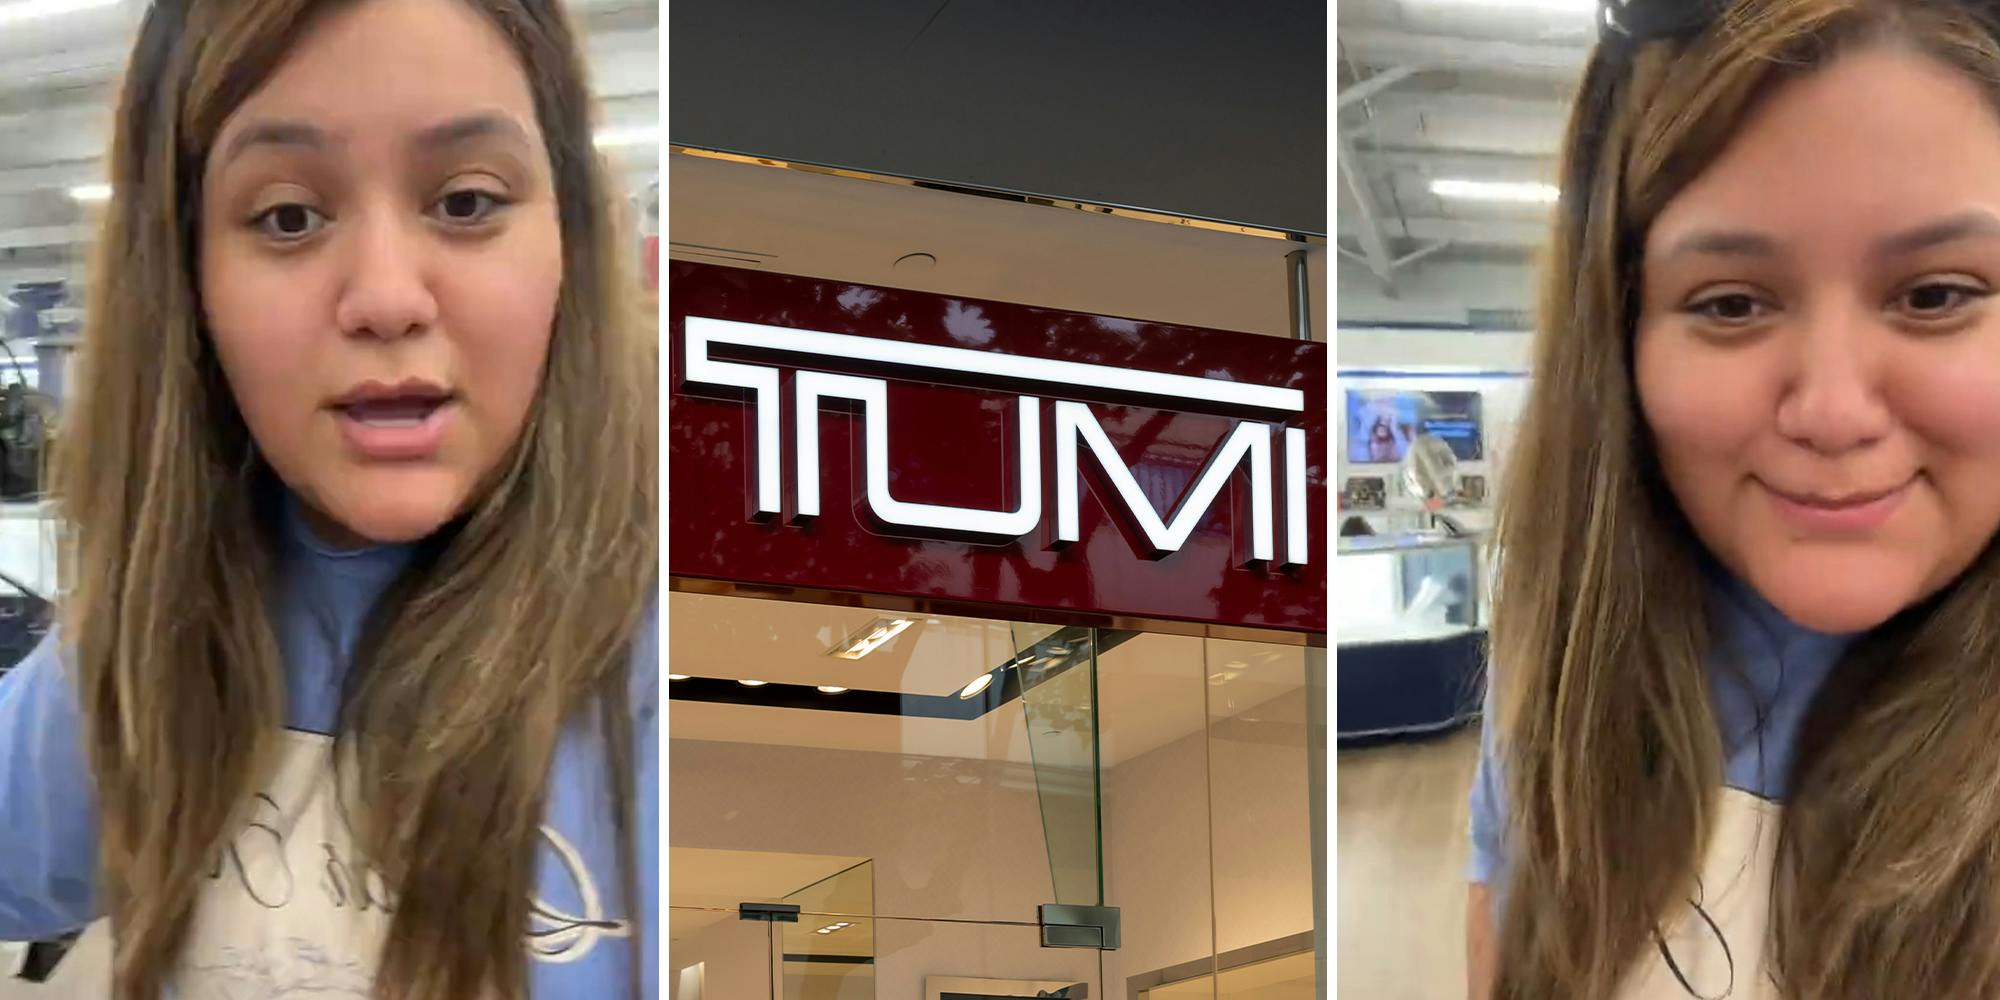 ‘Should I get it?’: Woman finds $1,500 ‘unclaimed’ TUMI airport baggage for $150. Is it worth it?